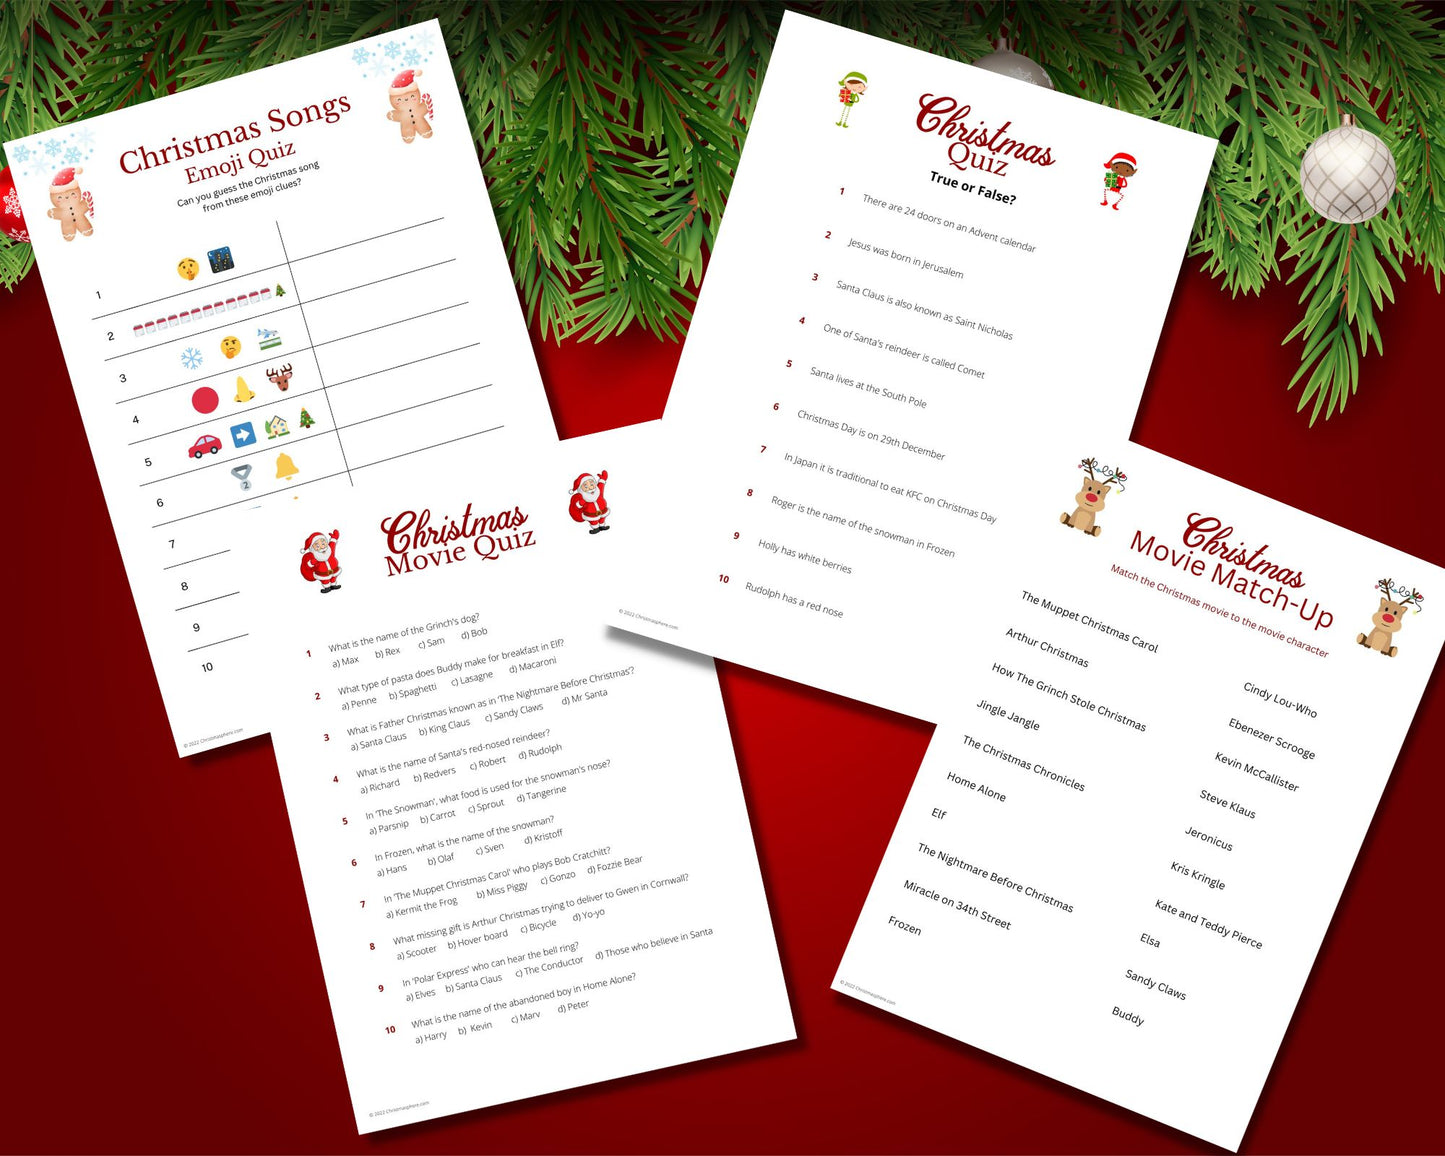 Kids Christmas Quizzes and Games Bundle | 38 pages | 3 Christmas picture quizzes